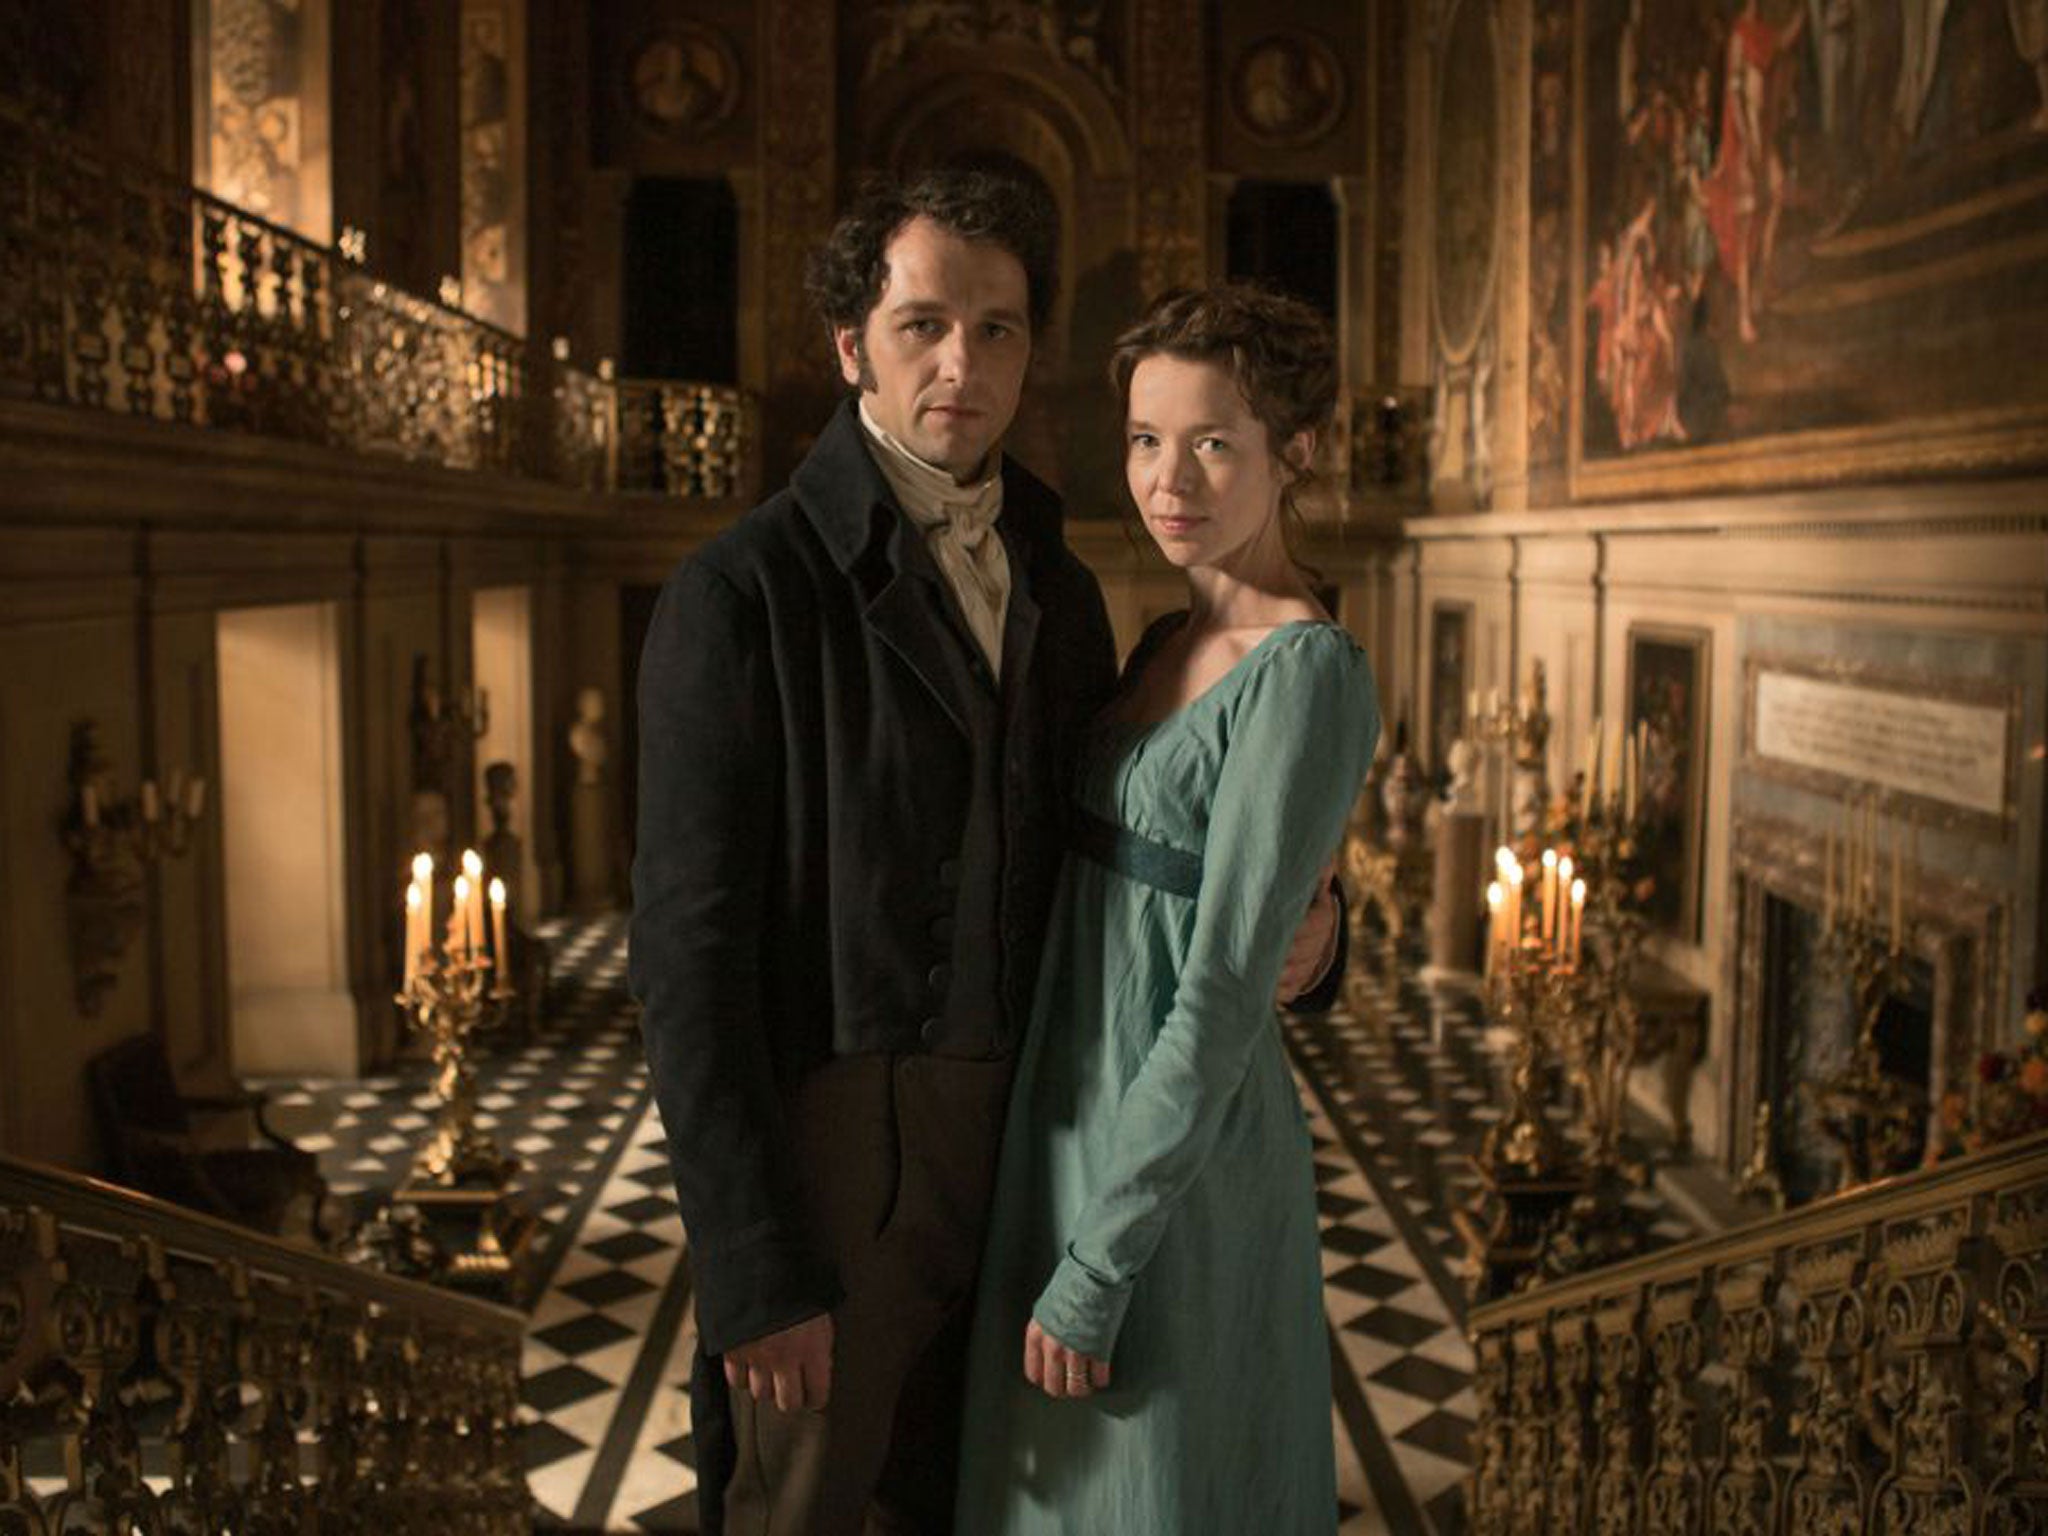 To the manor born: Matthew Rhys and Anna Maxwell Martin on the set of ‘Death Comes to Pemberley'